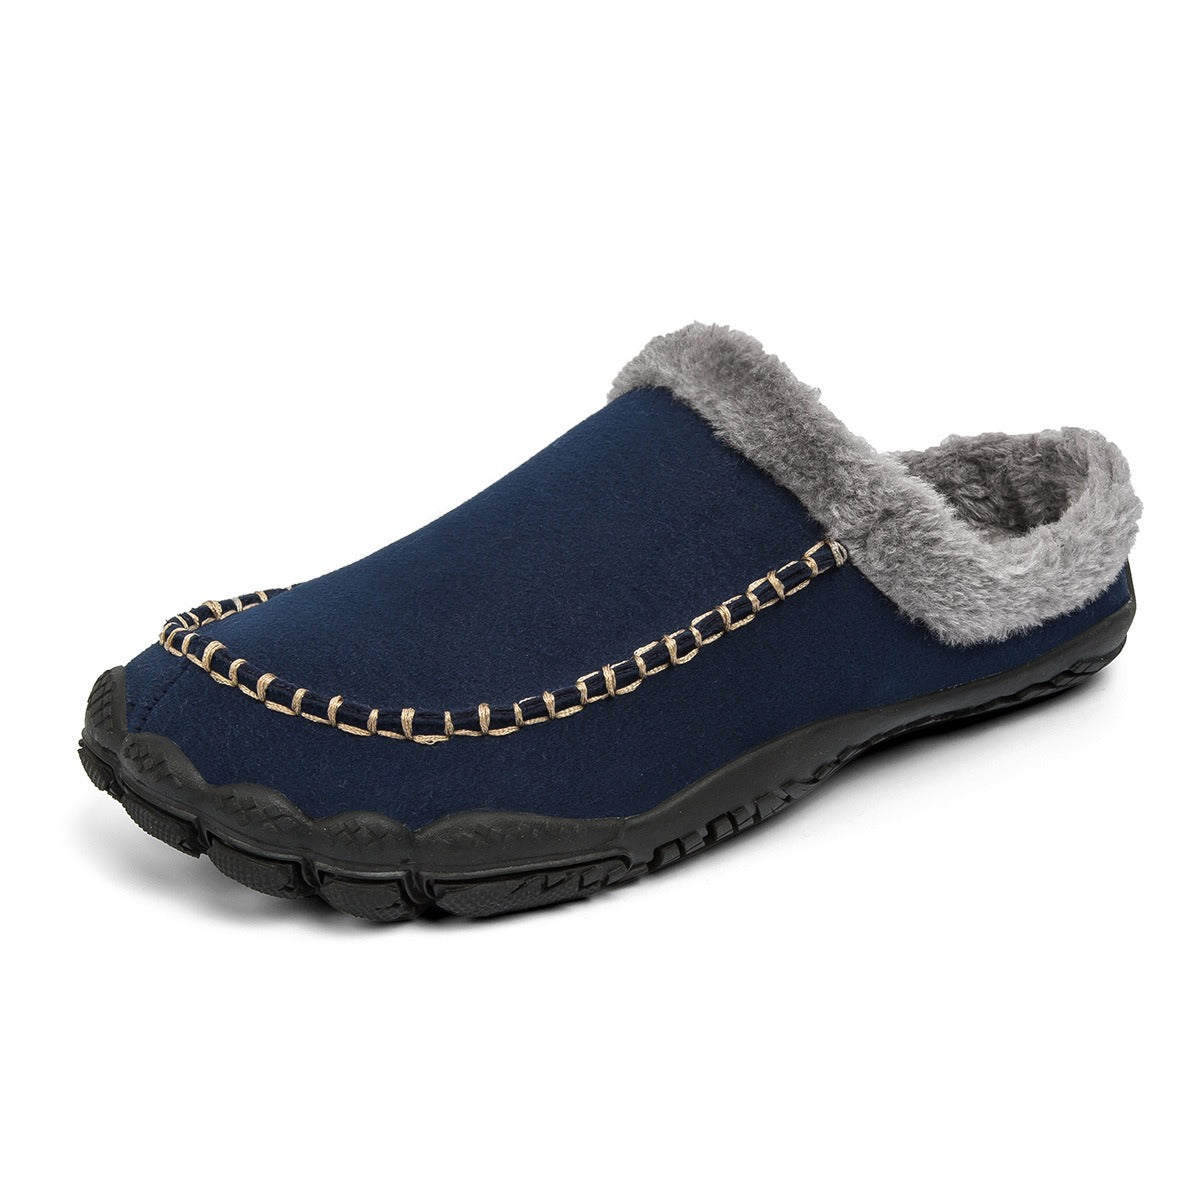 Cotton slippers for men in autumn and winter, indoor leisure, fitness, and sports shoes